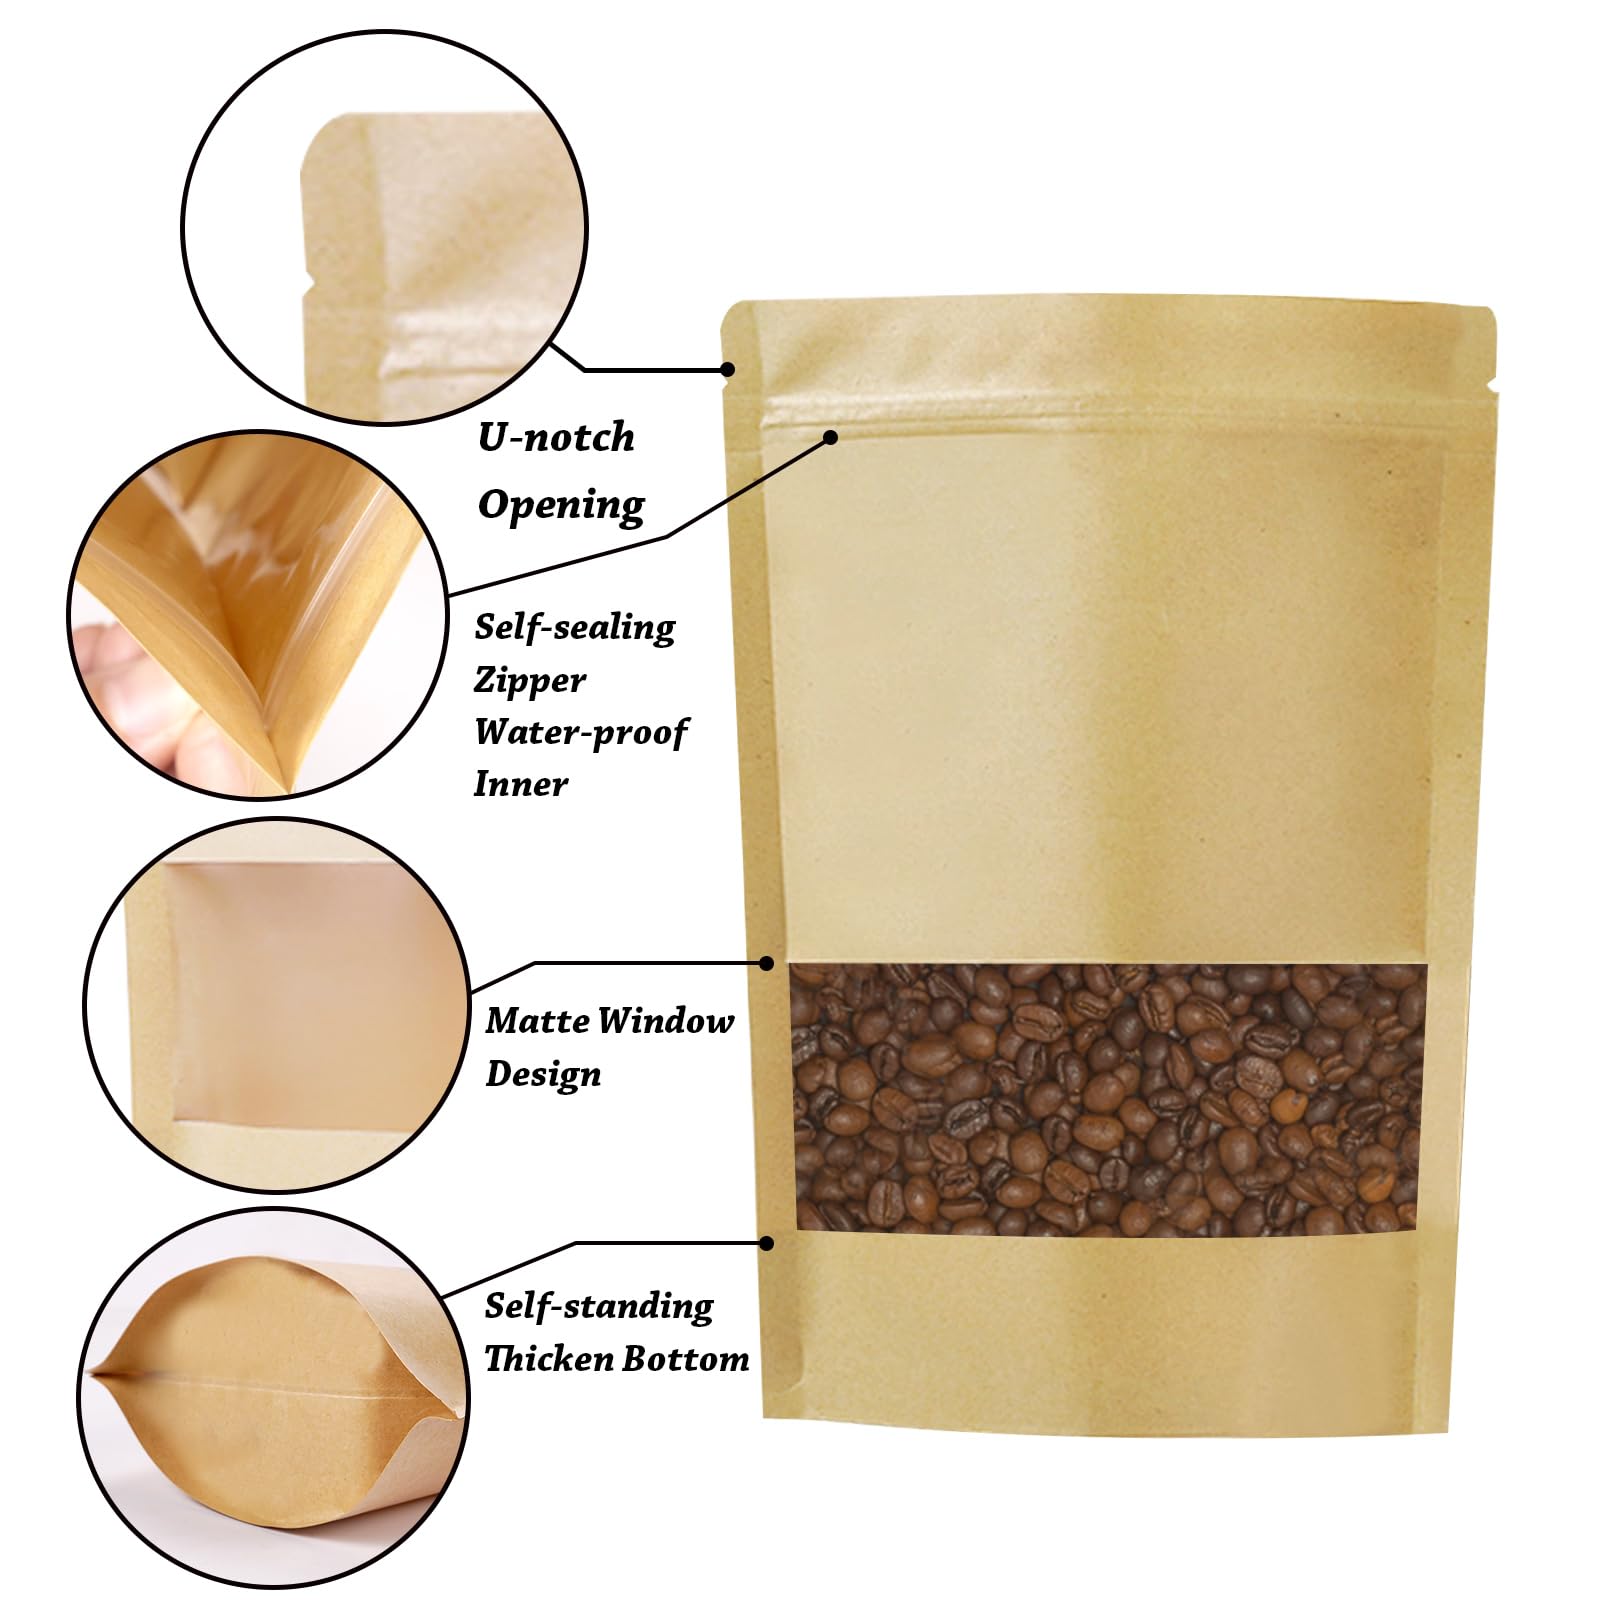 100 PCS Resealable Bags, Stand Up Kraft Paper Bags with Matte Window, Zipper Lock Food Storage Bags for Small Business and Home, 3.54 * 5.51 Inches Reusable Sealable Bags for Packaging